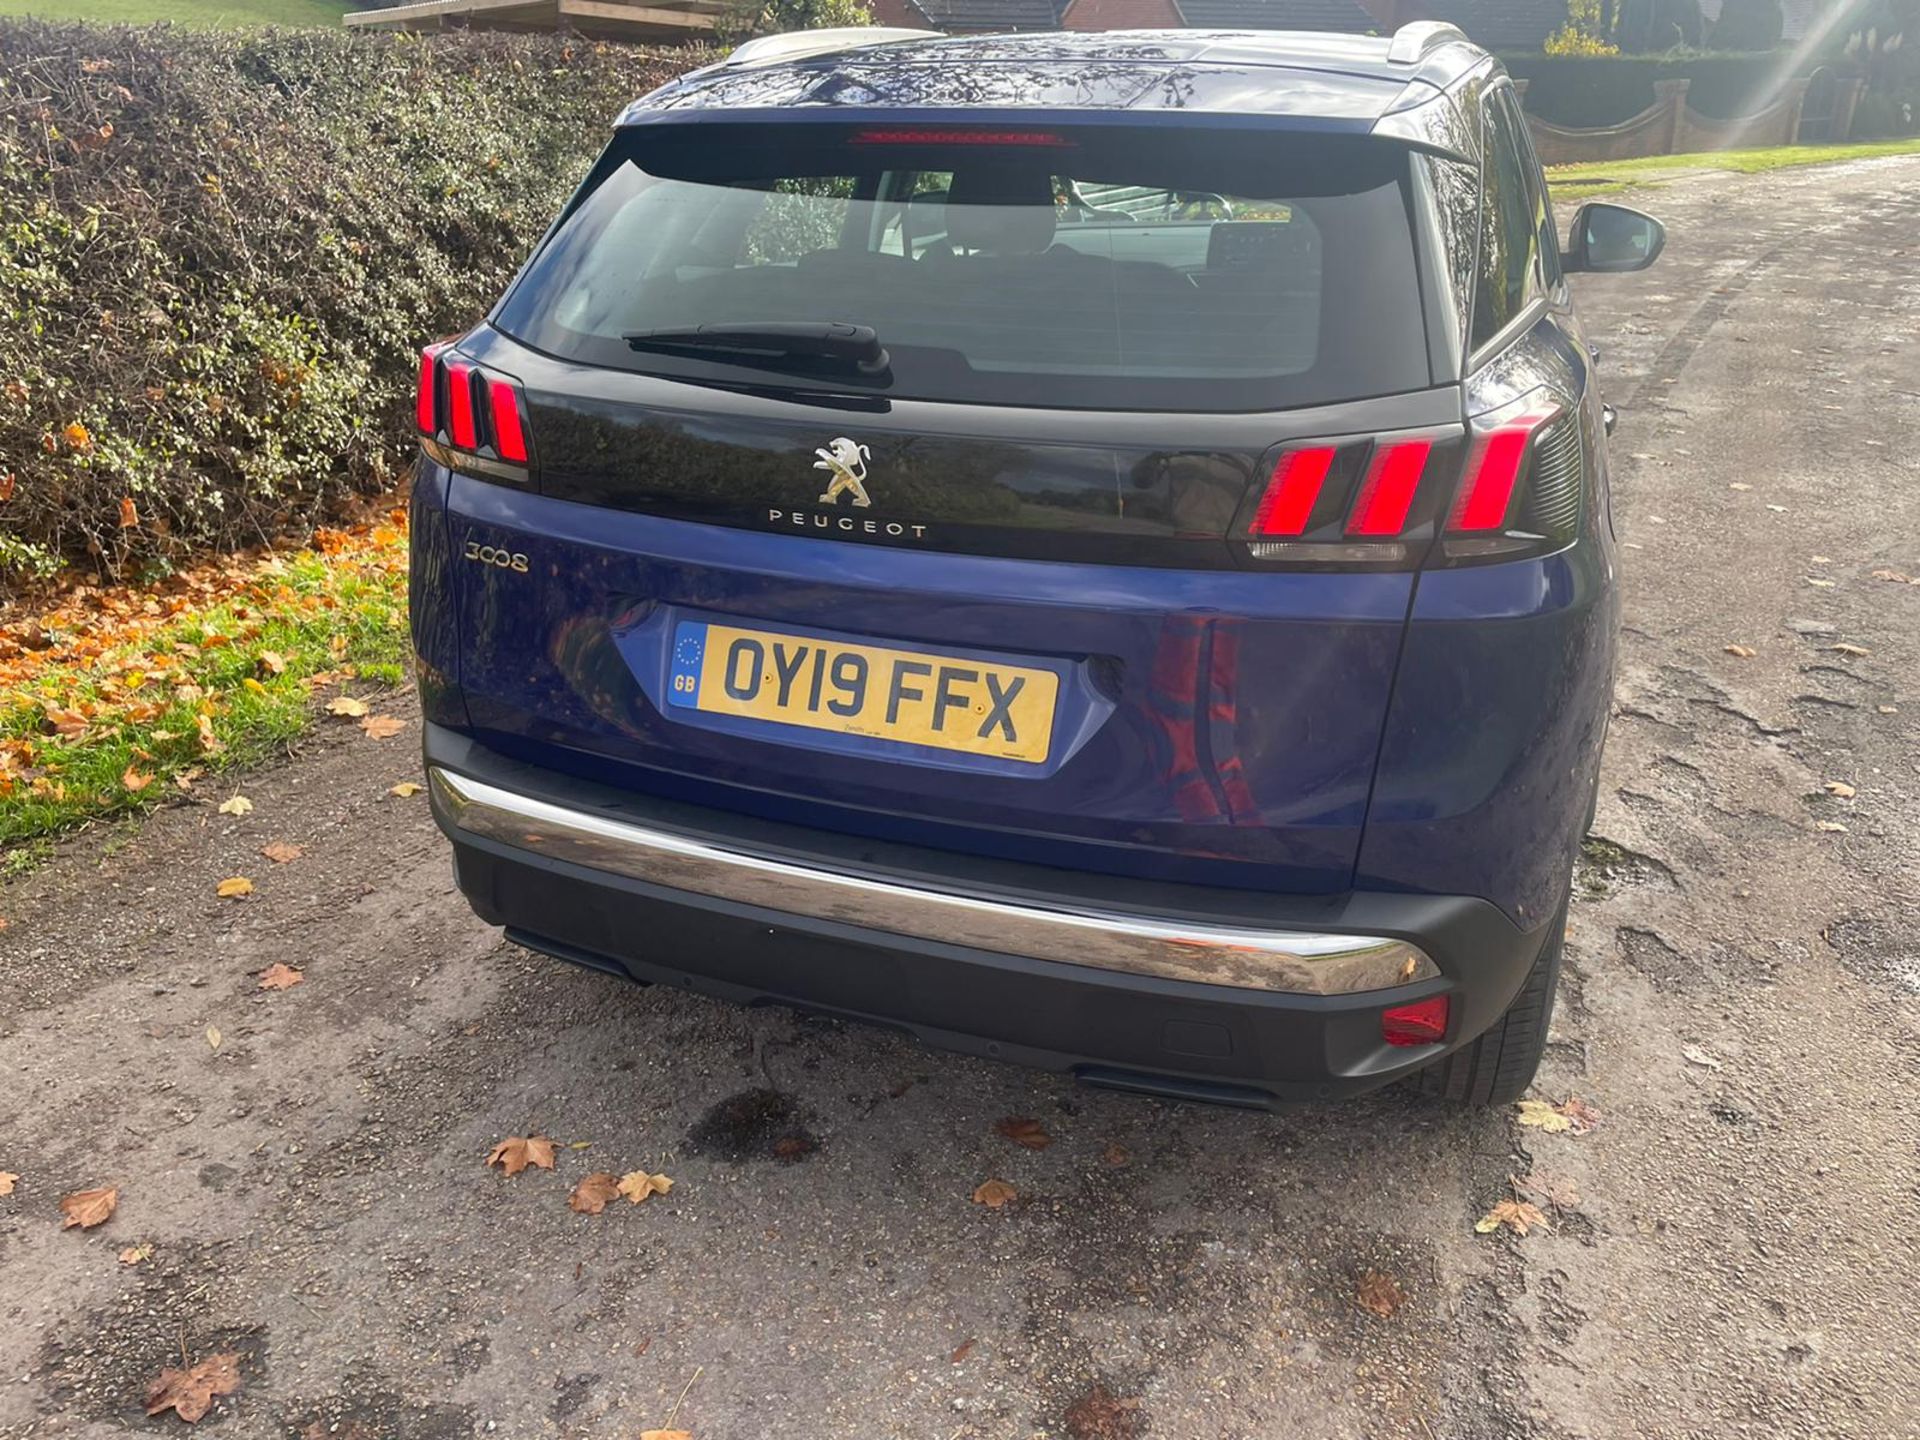 2019/19 REG PEUGEOT 3008 ACTIVE BLUEHDI S/S AUTO 1.5 DIESEL AUTOMATIC, SHOWING 1 FORMER KEEPER - Image 7 of 21